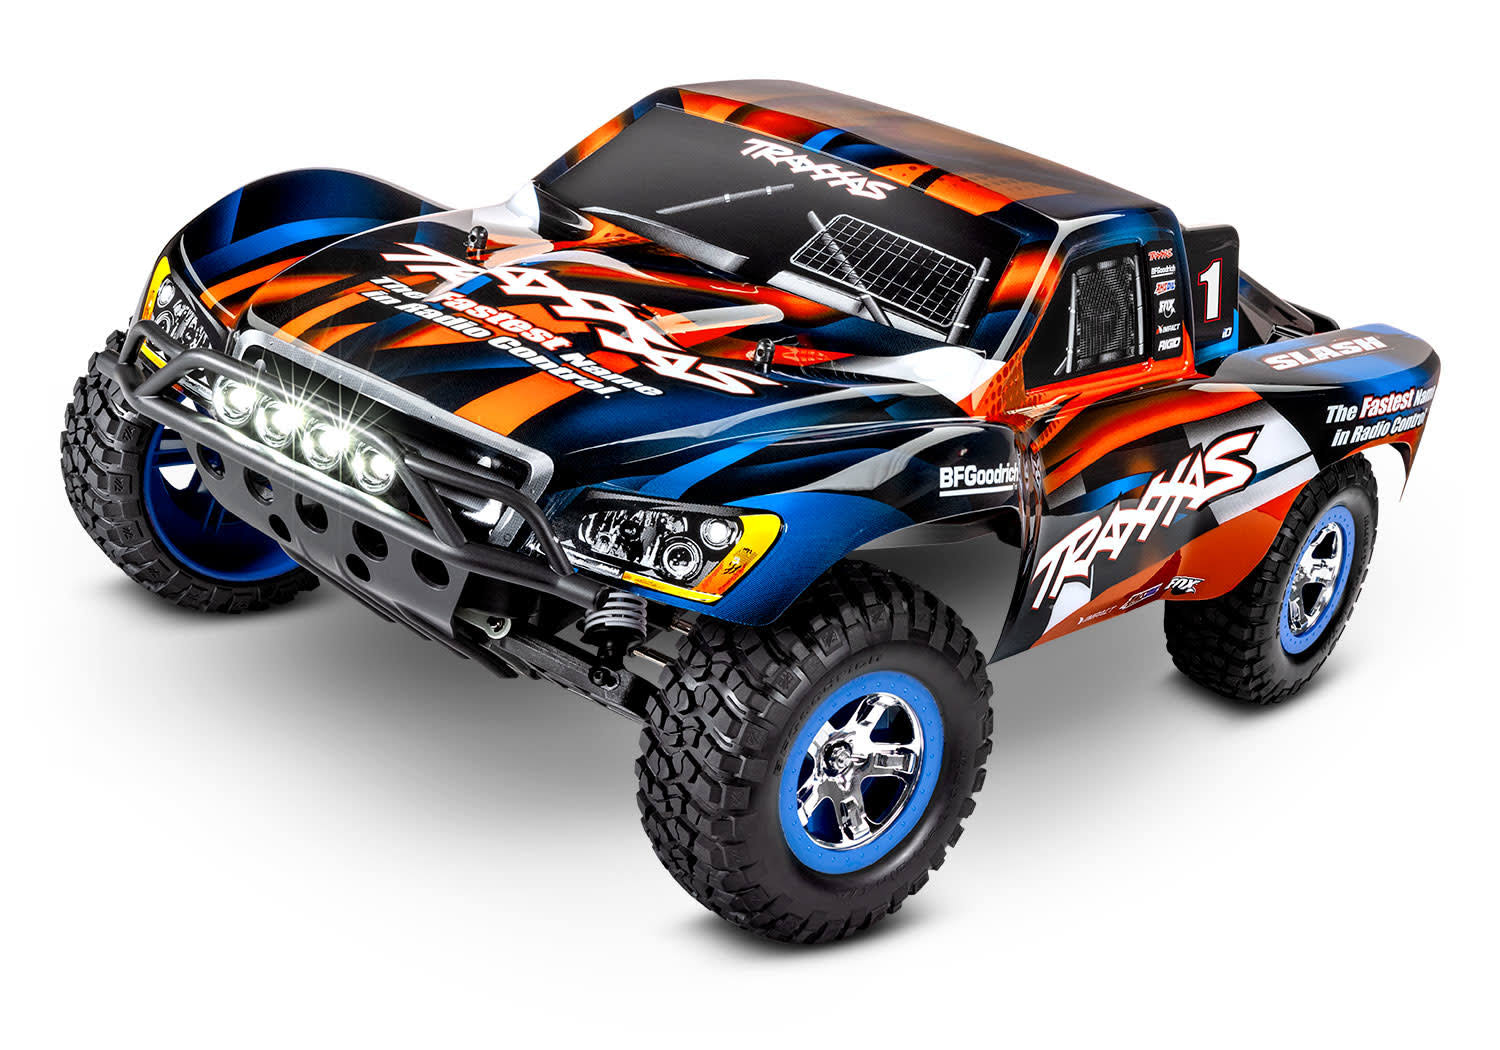 TRAXXAS TRA 58034-61-ORNG Slash: 1/10-Scale 2WD Short Course Racing Truck. Ready-To-Race with TQ 2.4GHz radio system, XL-5 ESC (fwd/rev), and LED